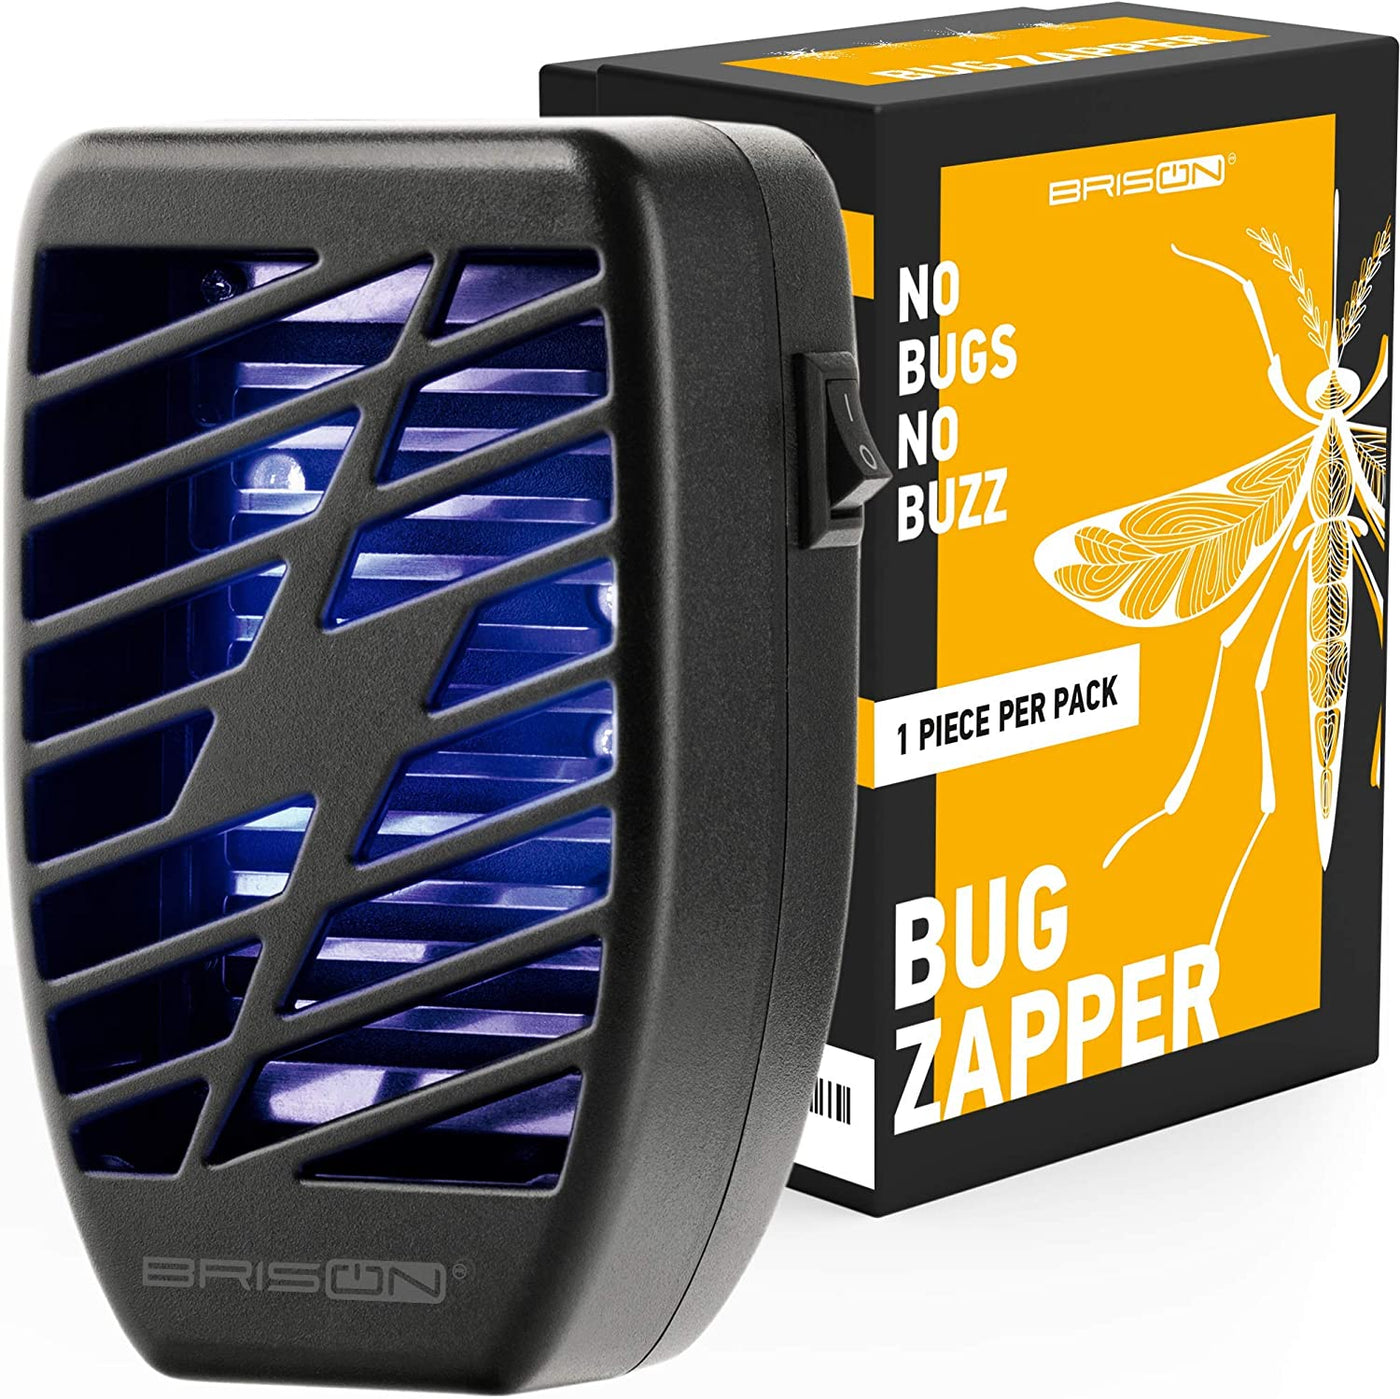 Indoor Bug Zapper Fly Zapper Mosquitos Zapper - Electric Portable Plug in Home Insects Zapper for removes Insects Mosquitos Files Bugs Gnats Moths 1 Pack - Black